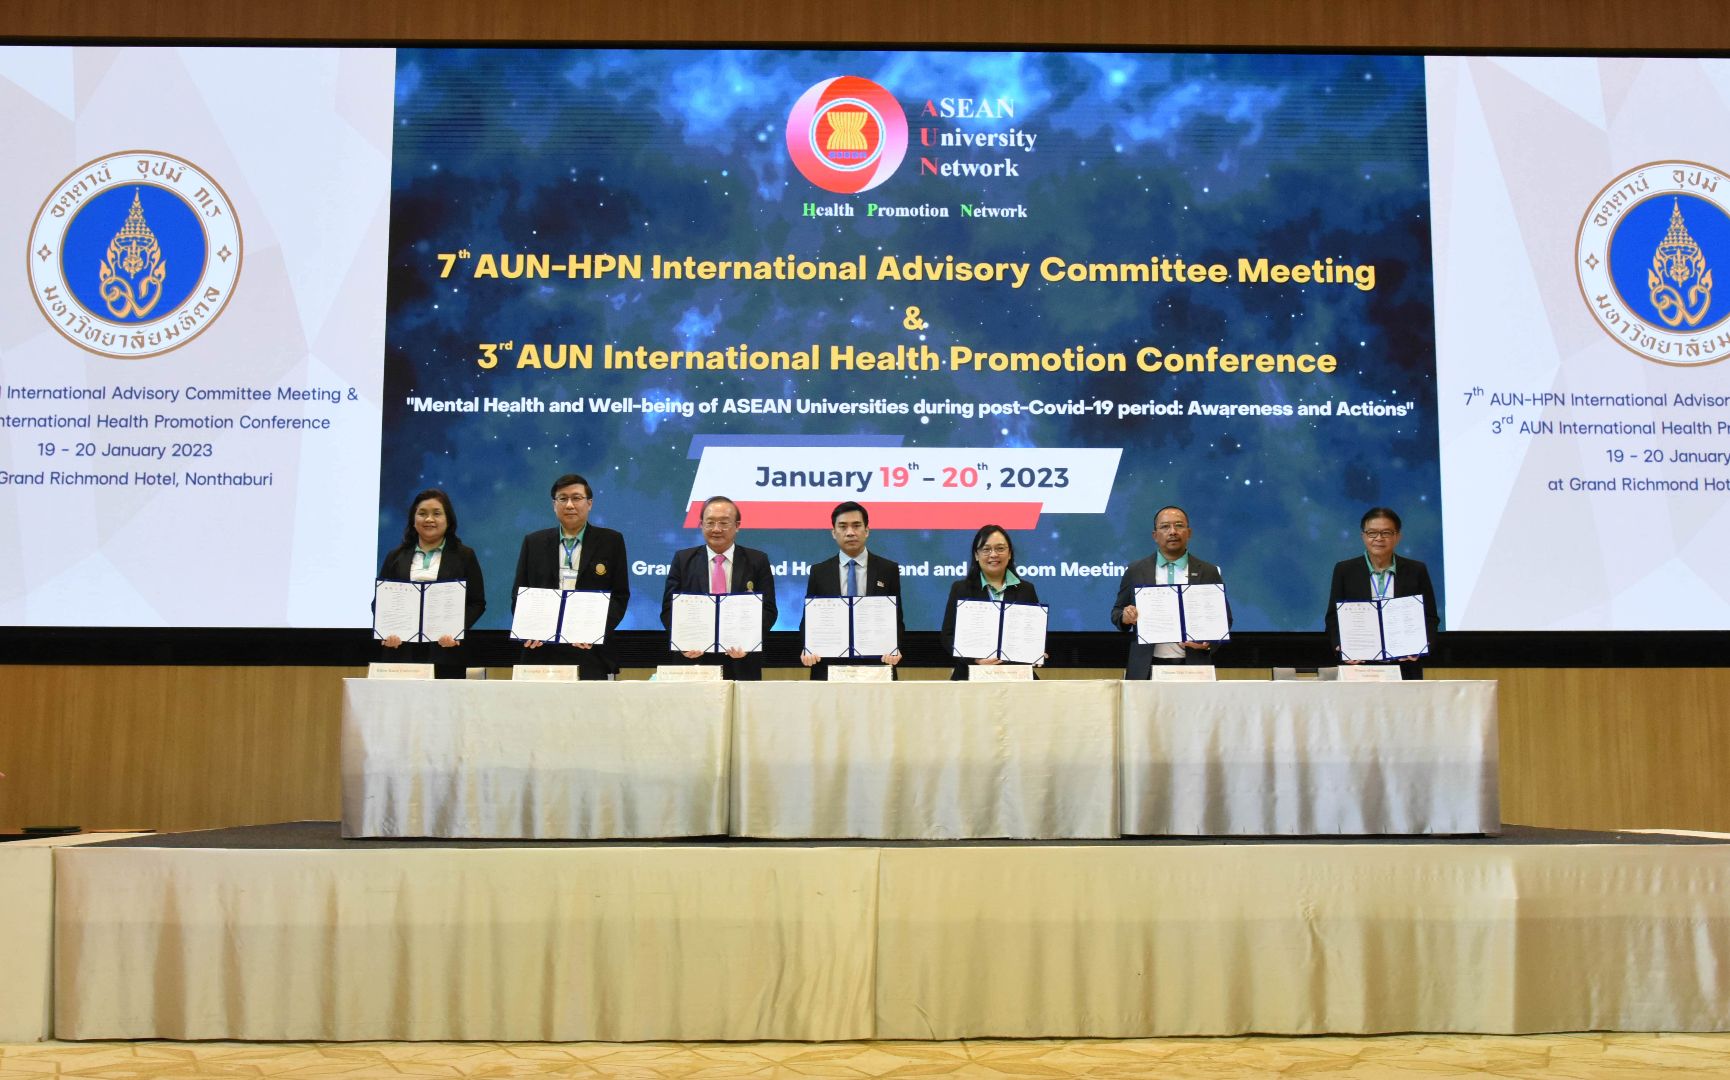 The MOU Signing Ceremonies from the 3rd AUN International Health Promotion Conference